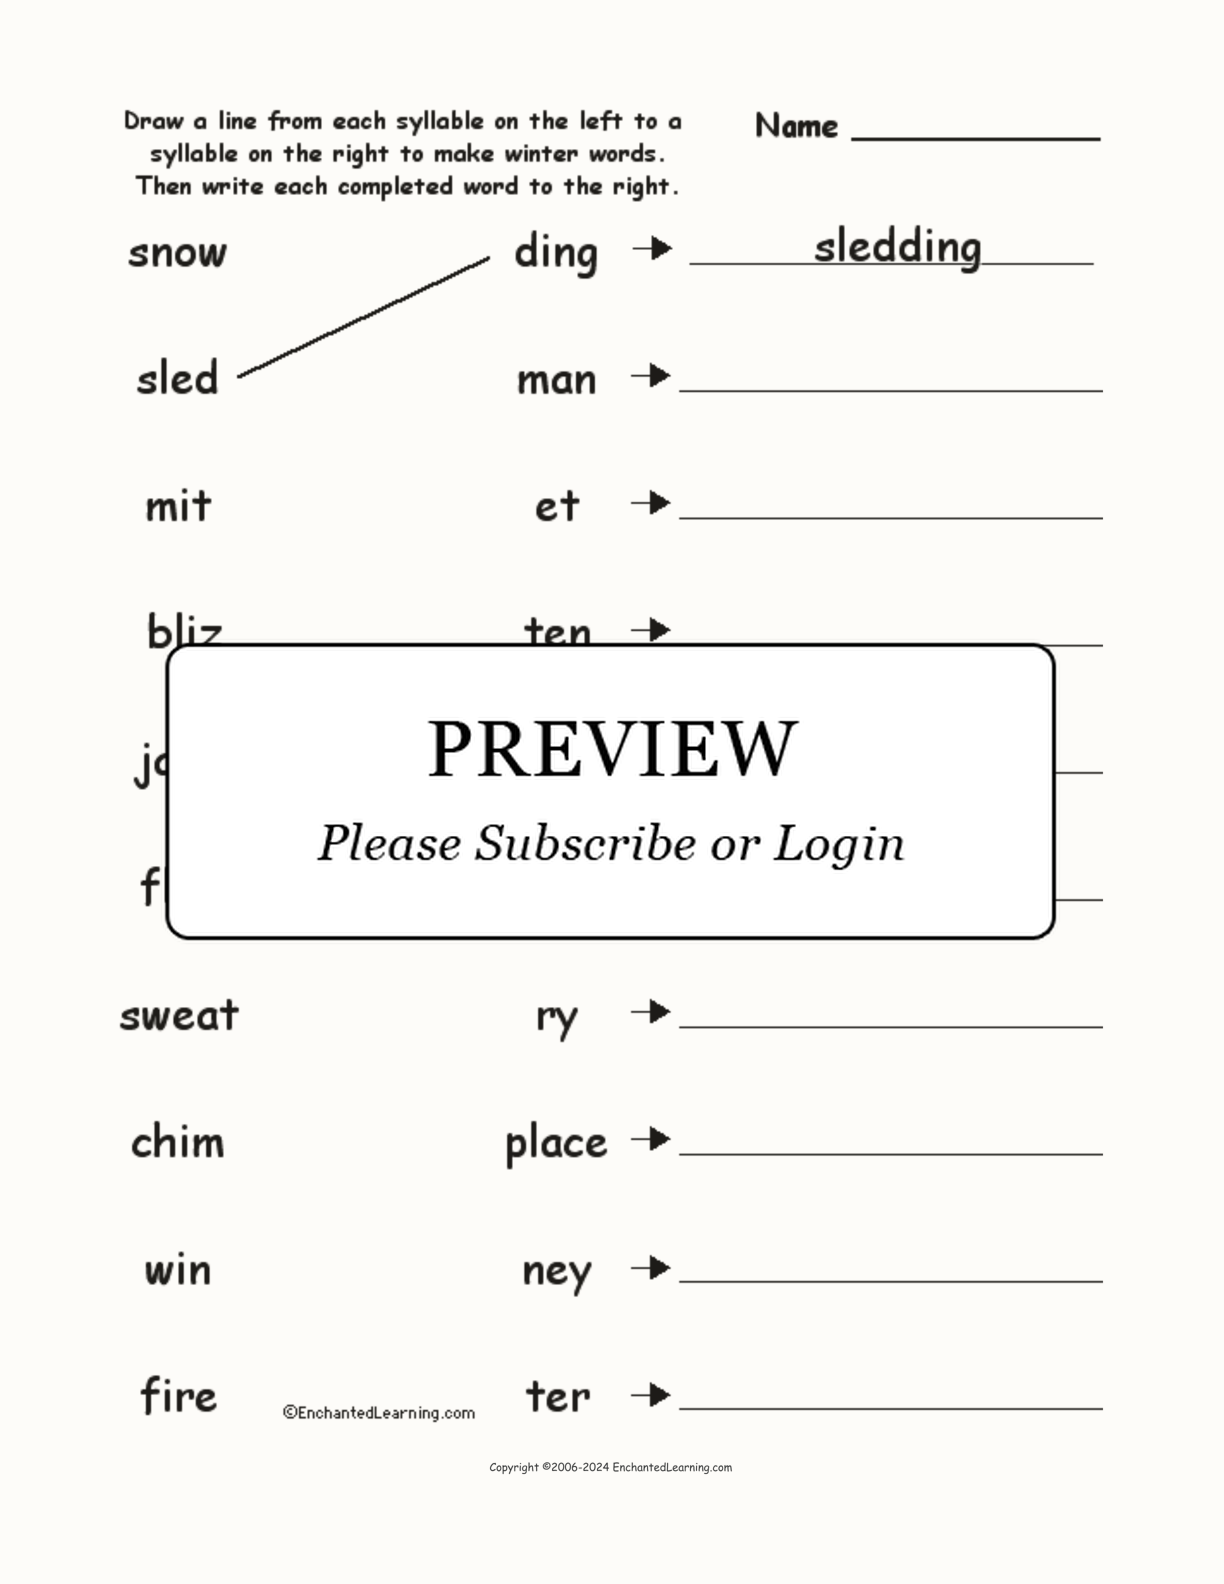 Match the Syllables: Winter Words interactive worksheet page 1